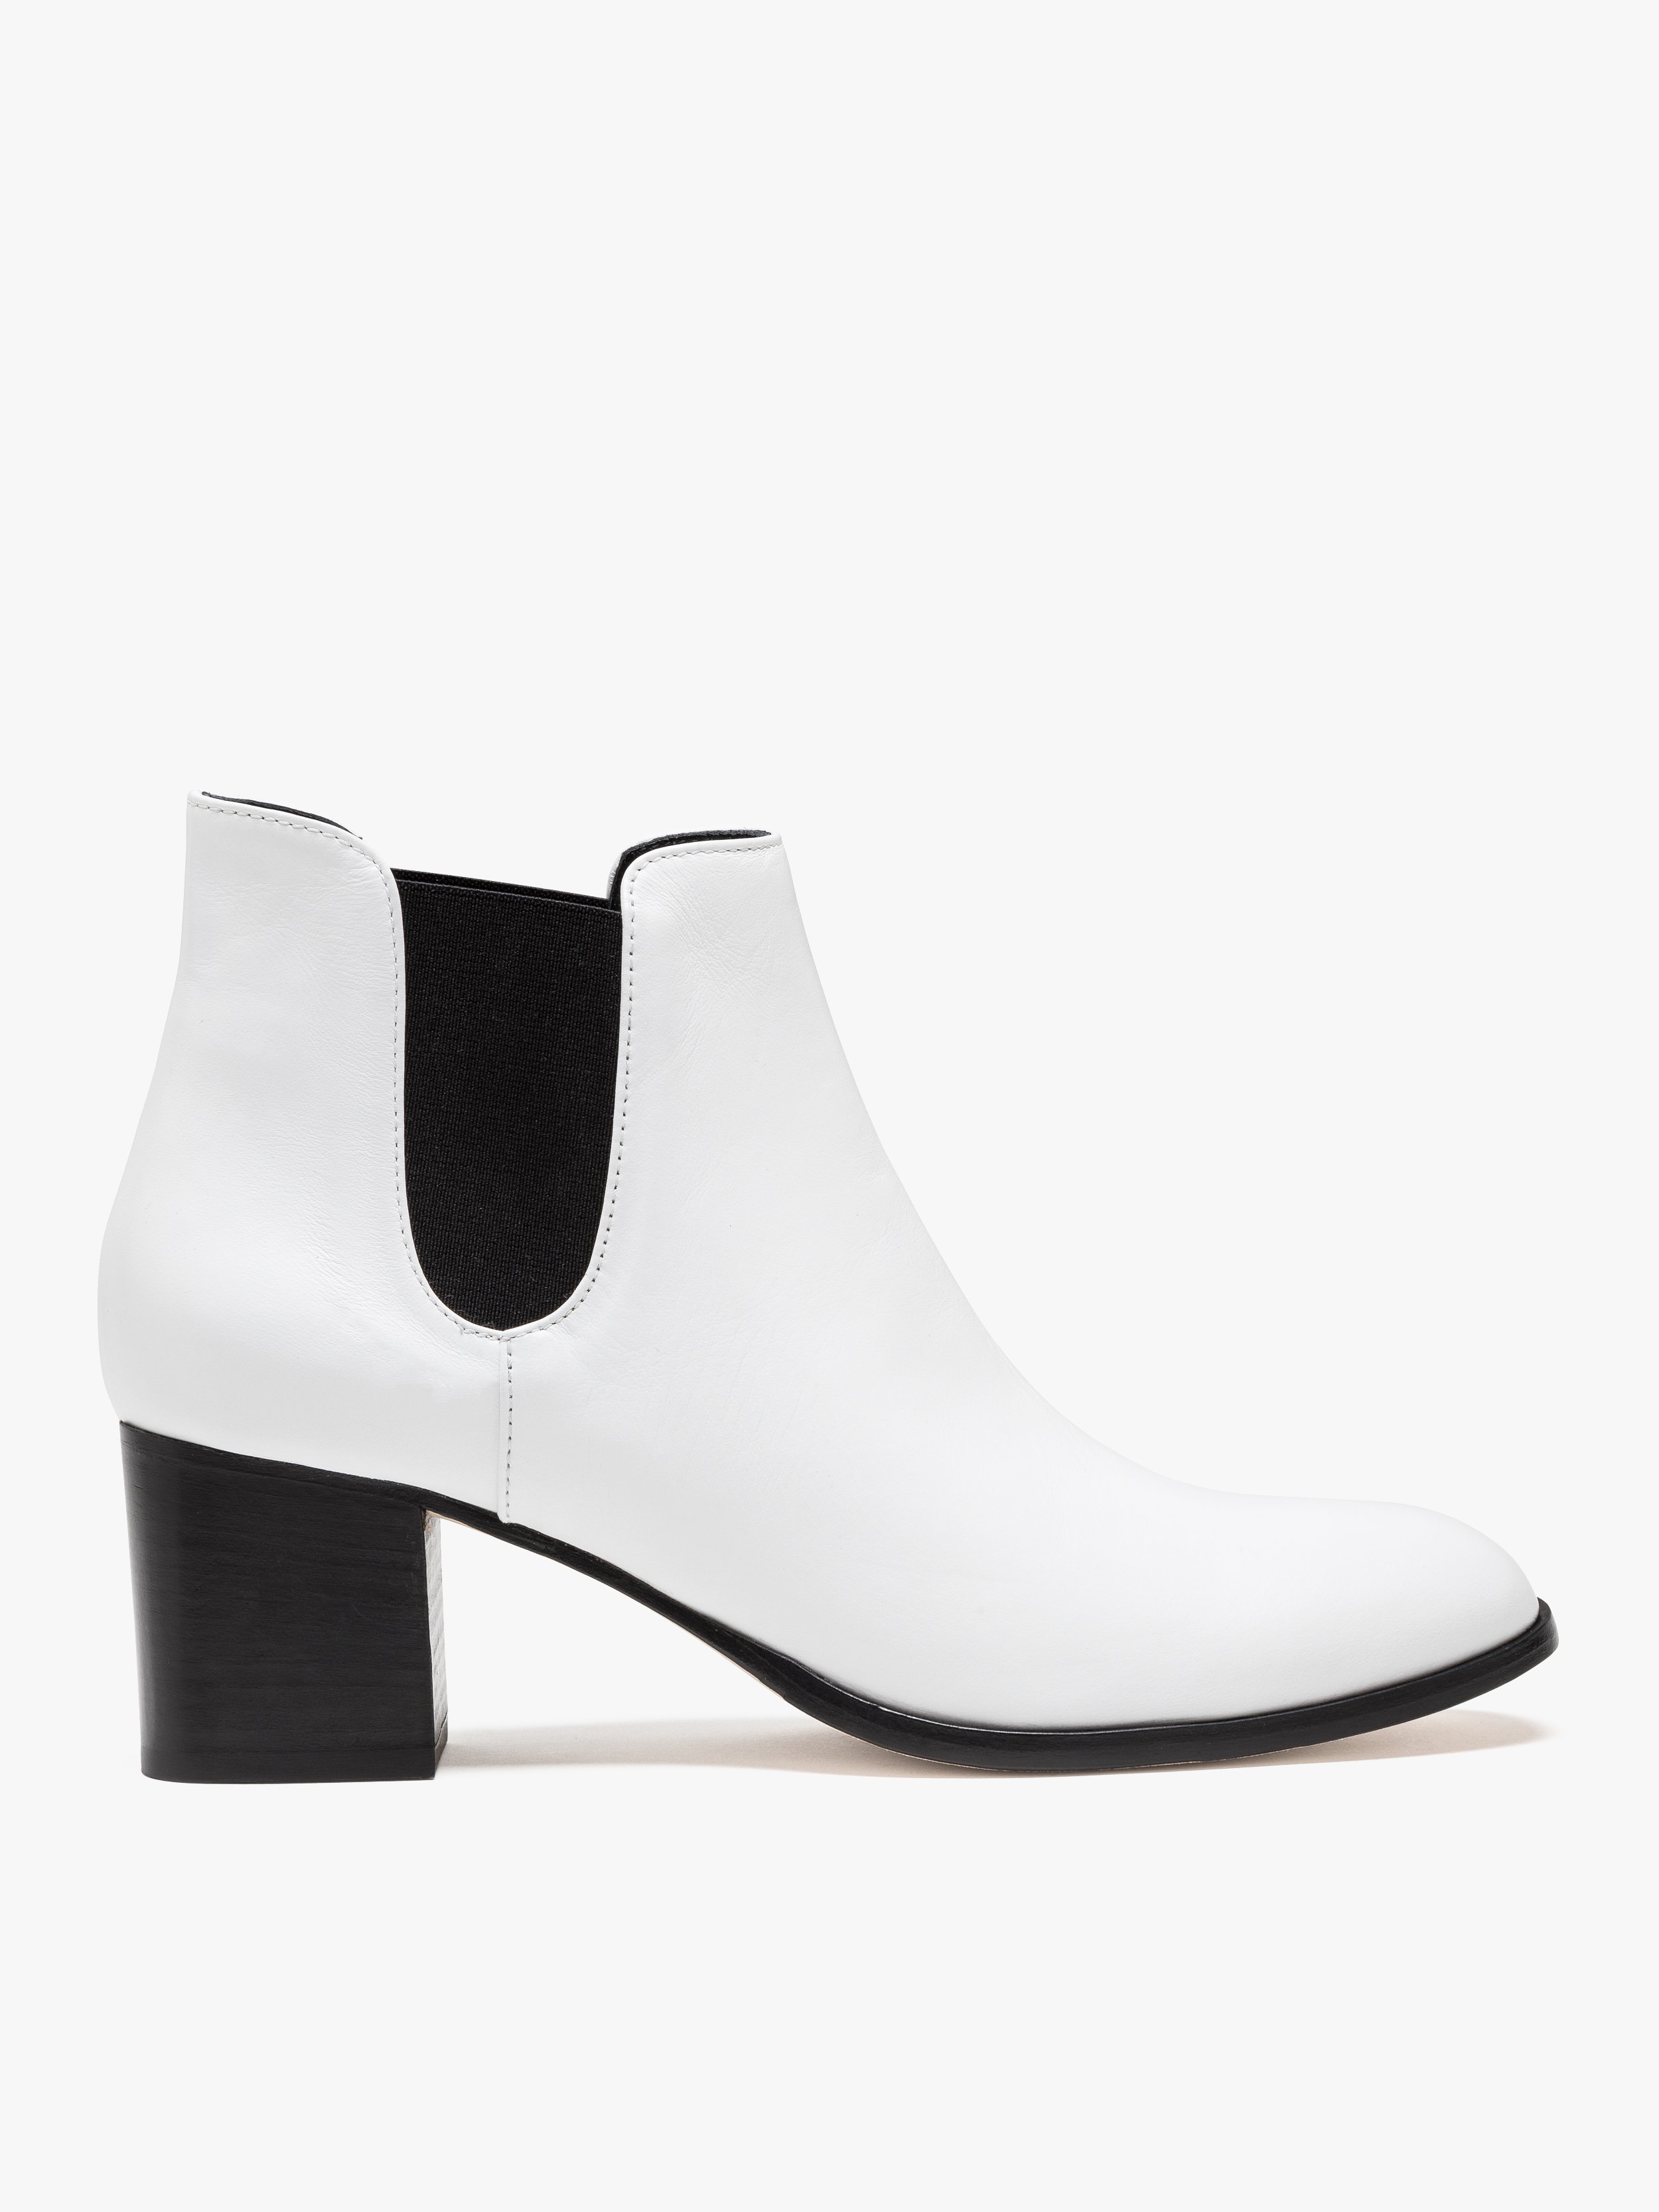 white ankle boots leather